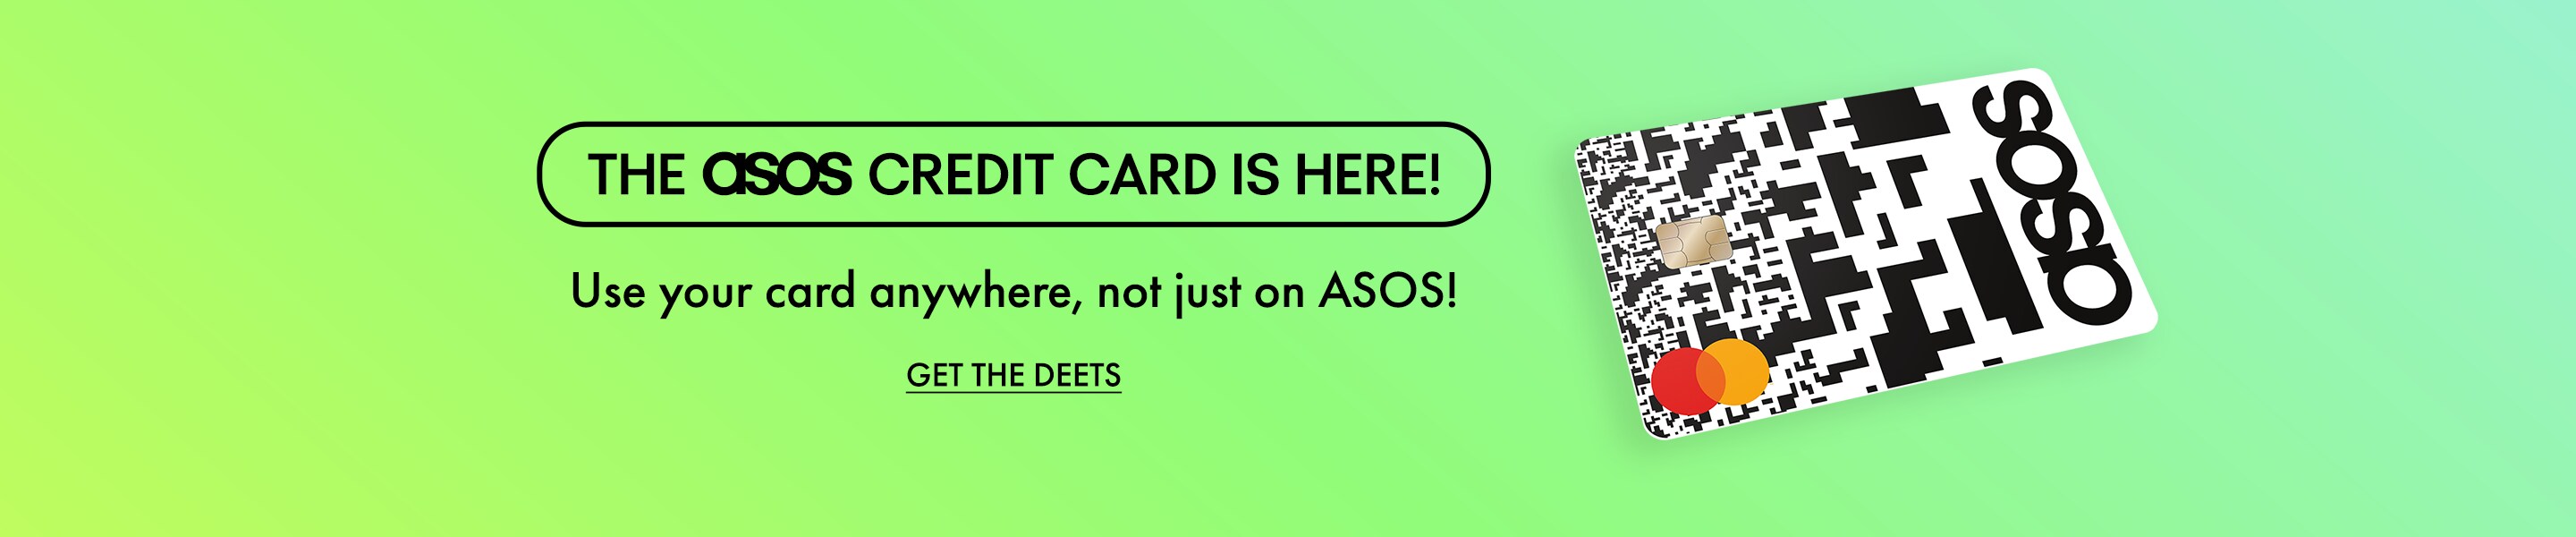 The asos credit card is here. Use your card anywhere not just on Asos. Get the deets.